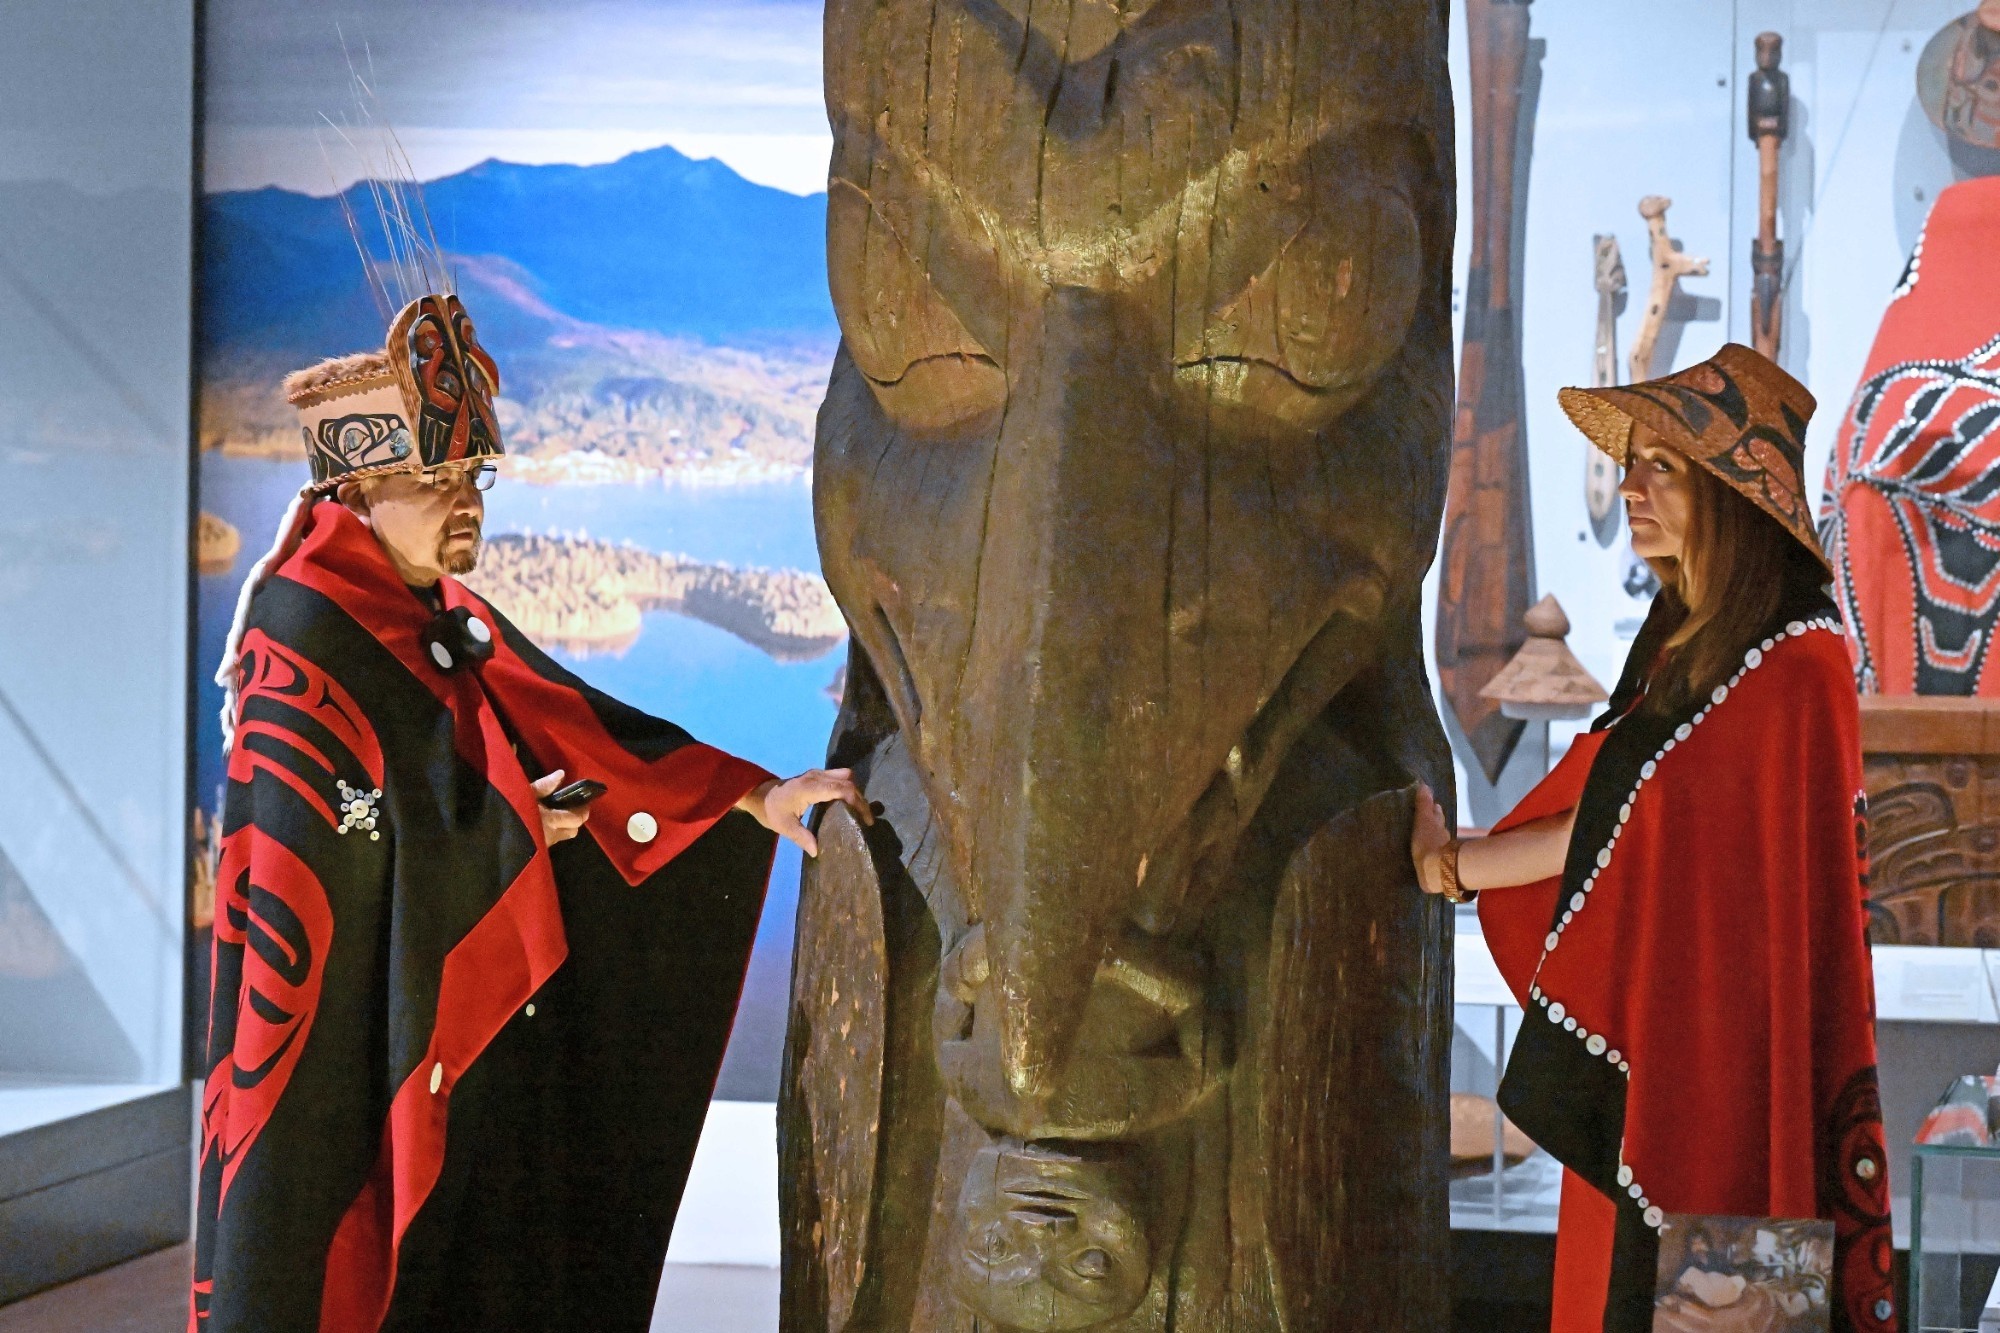 Sim’oogit Ni’isjoohl (Chief Earl Stephens) and Noxs Ts’aawit (Dr. Amy Parent) stand with the Ni'isjoohl memorial pole in the National Museum of Scotland on August 22, 2022